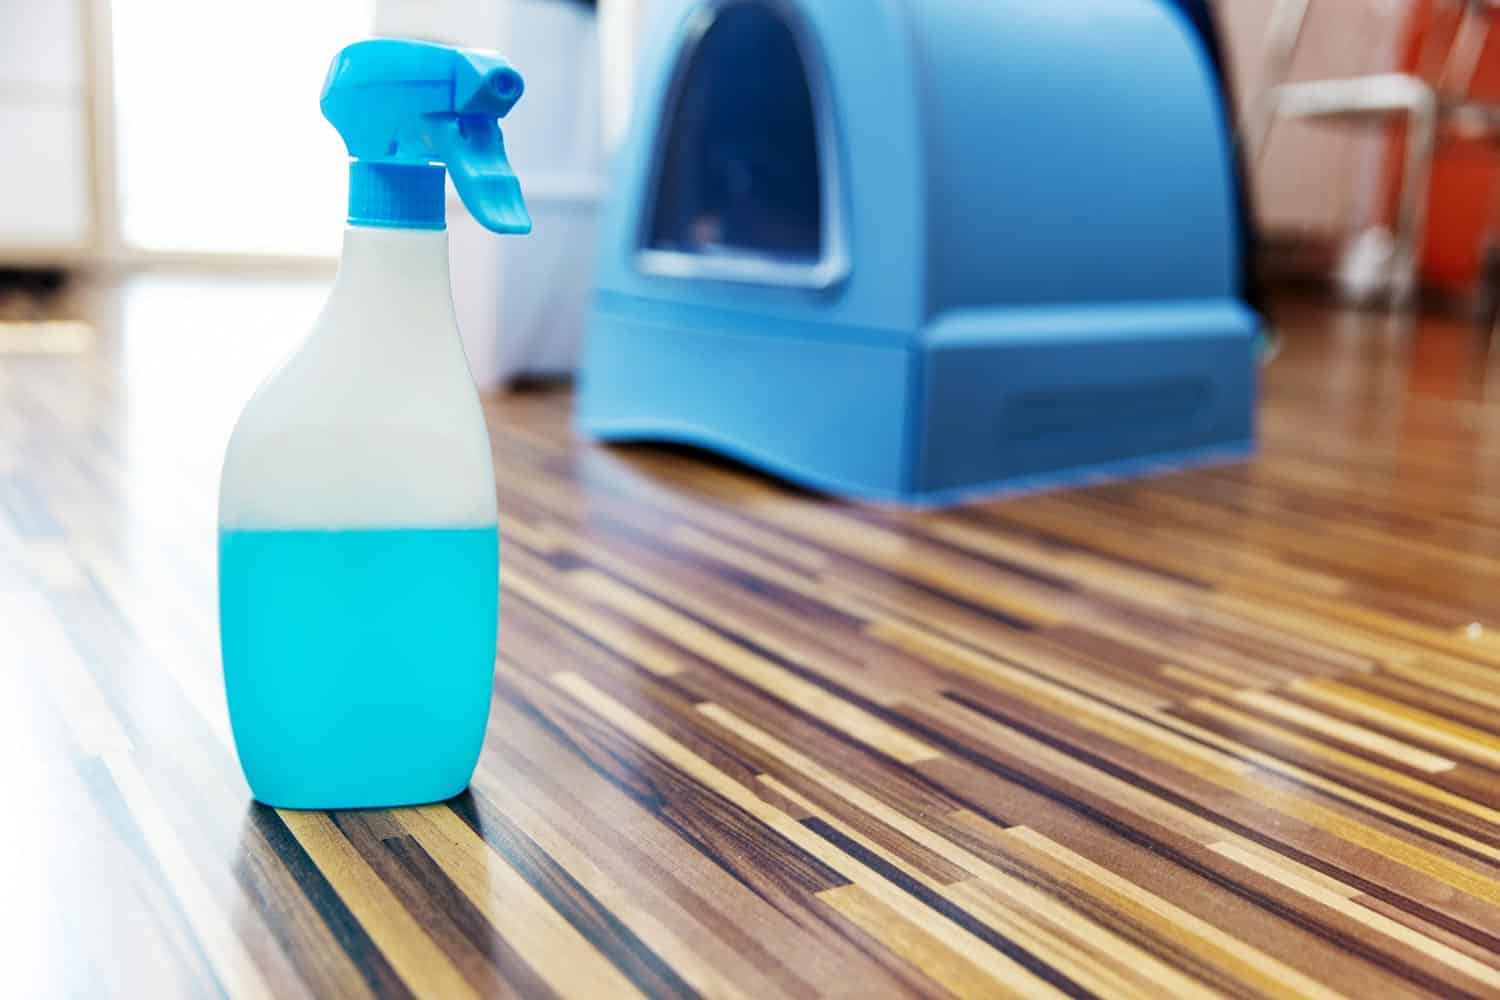 Plastic spray bottle with disinfectant for cleaning cat litter box on hardwood floor